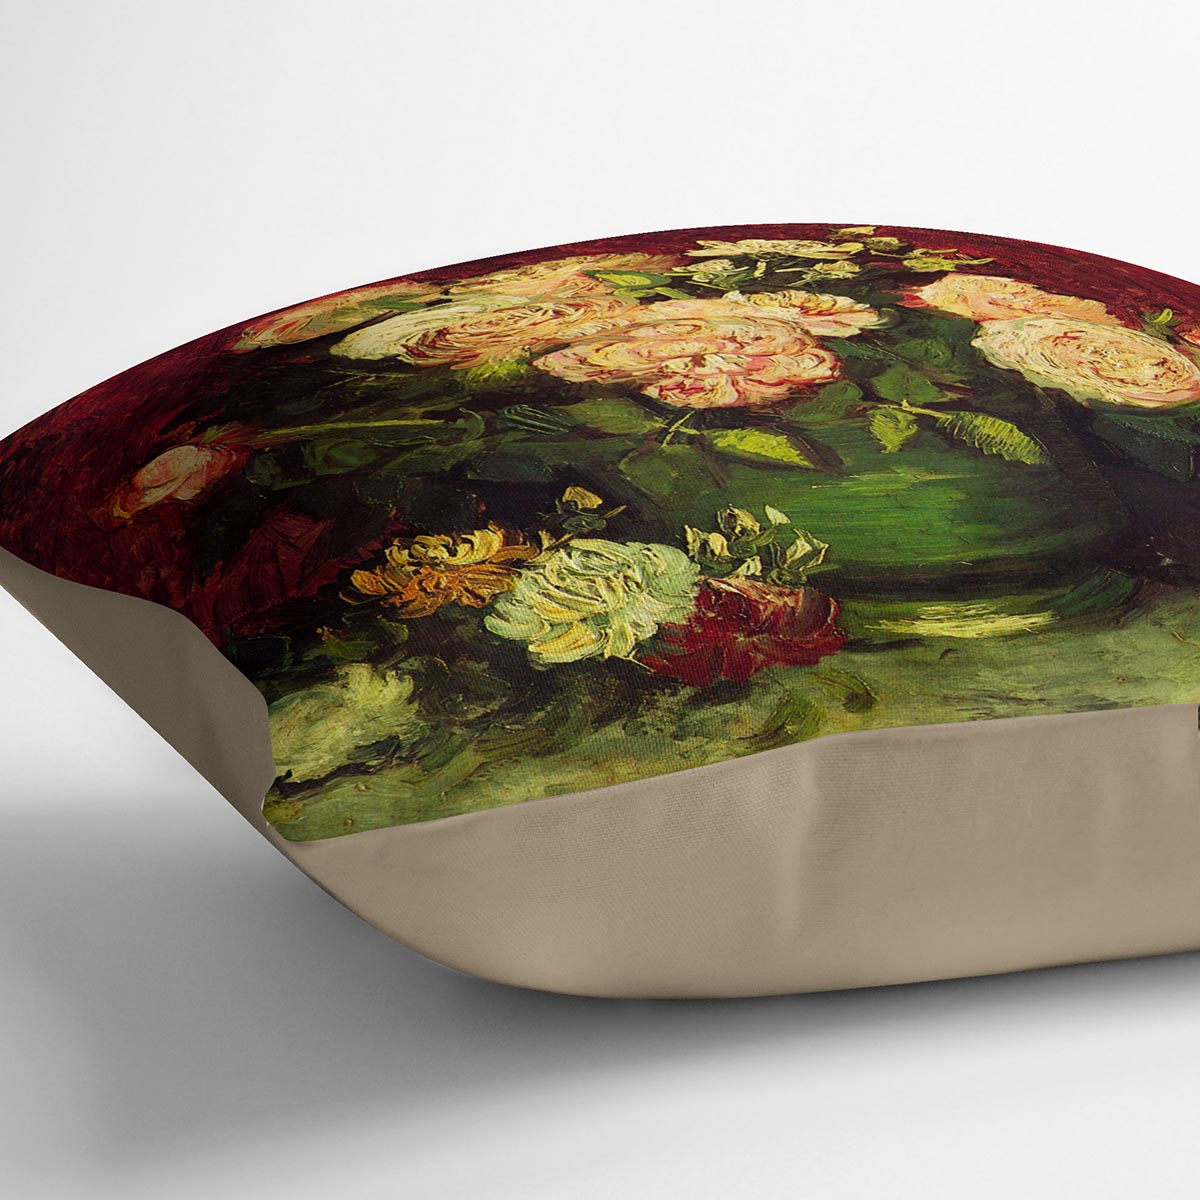 Bowl with Peonies and Roses by Van Gogh Cushion